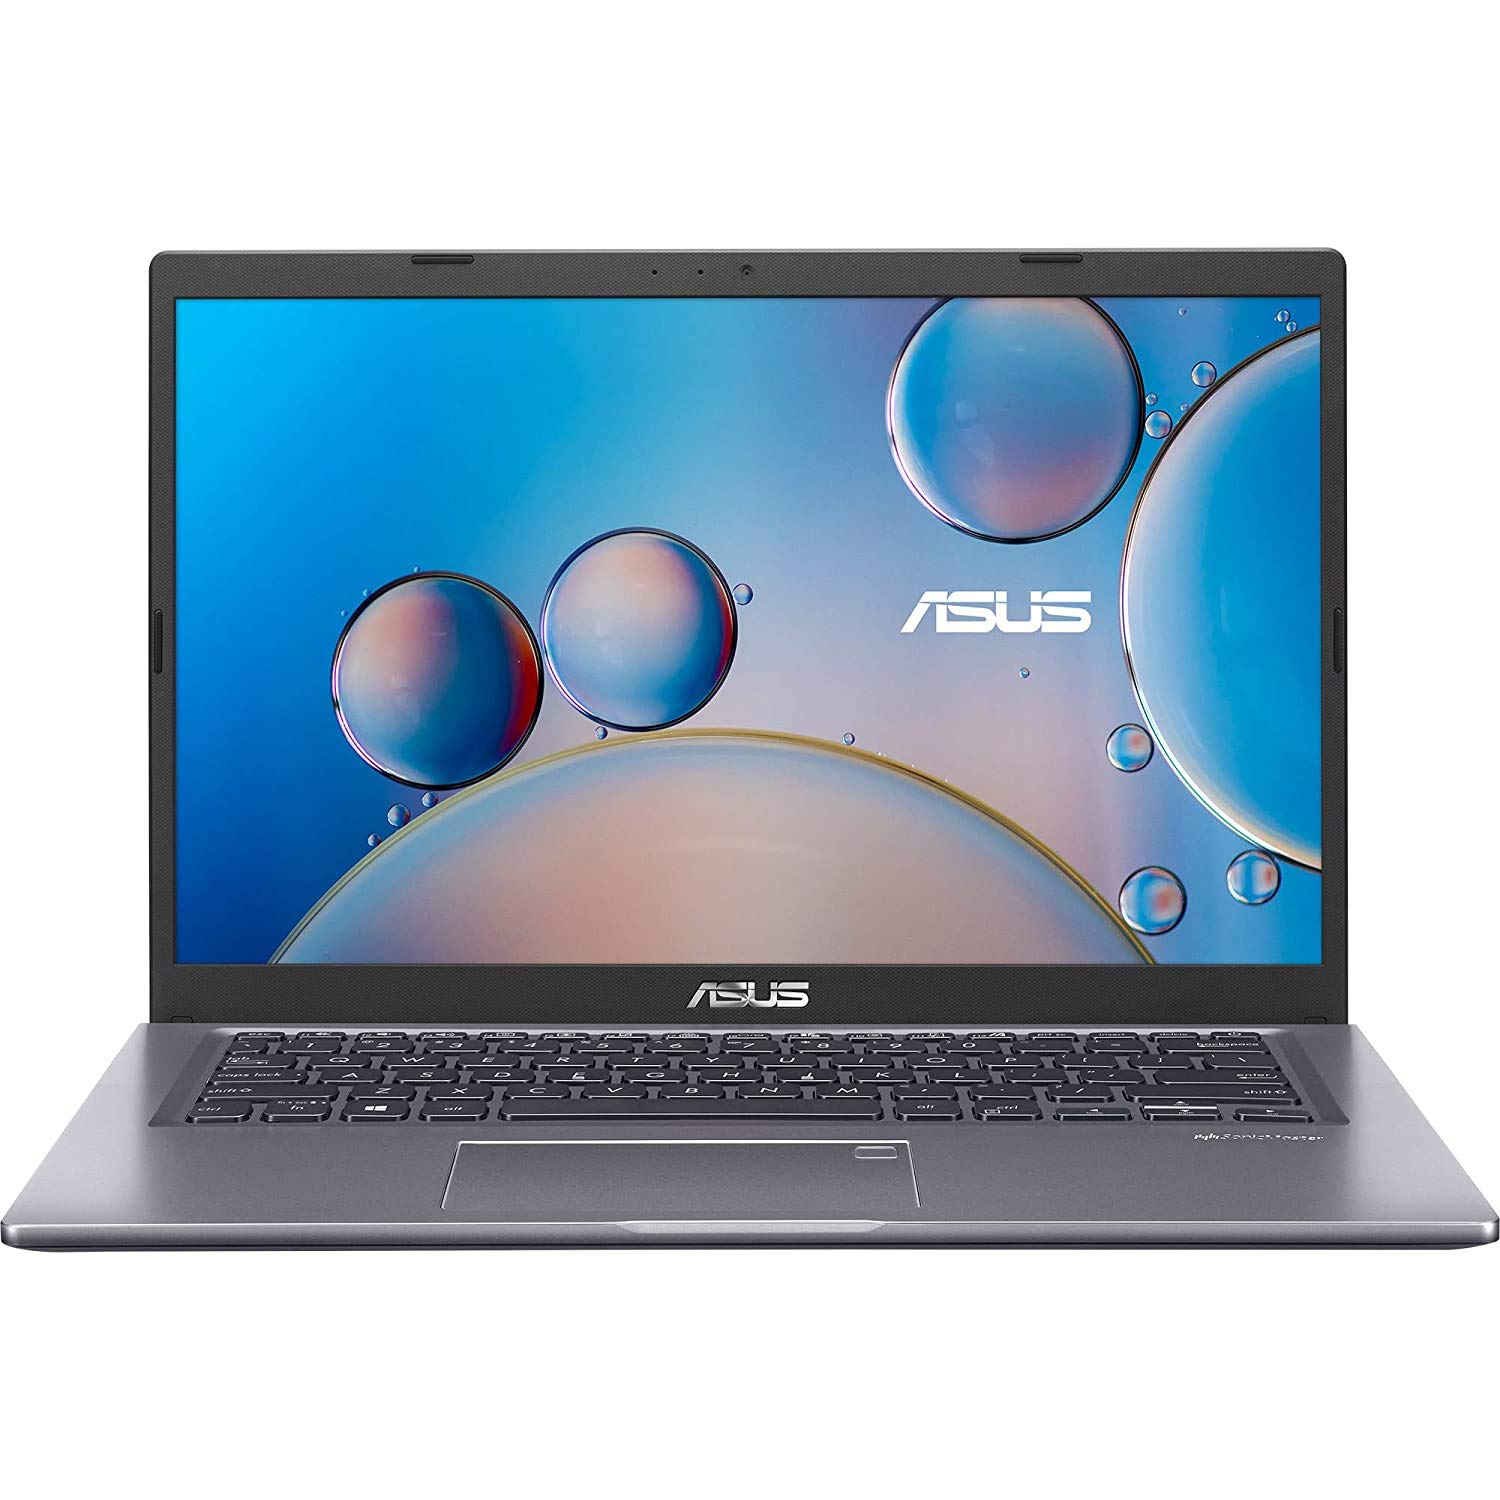 ASUS VivoBook 14 Intel Core i3-10110U 10th Gen 14-inch FHD Compact and Light Laptop